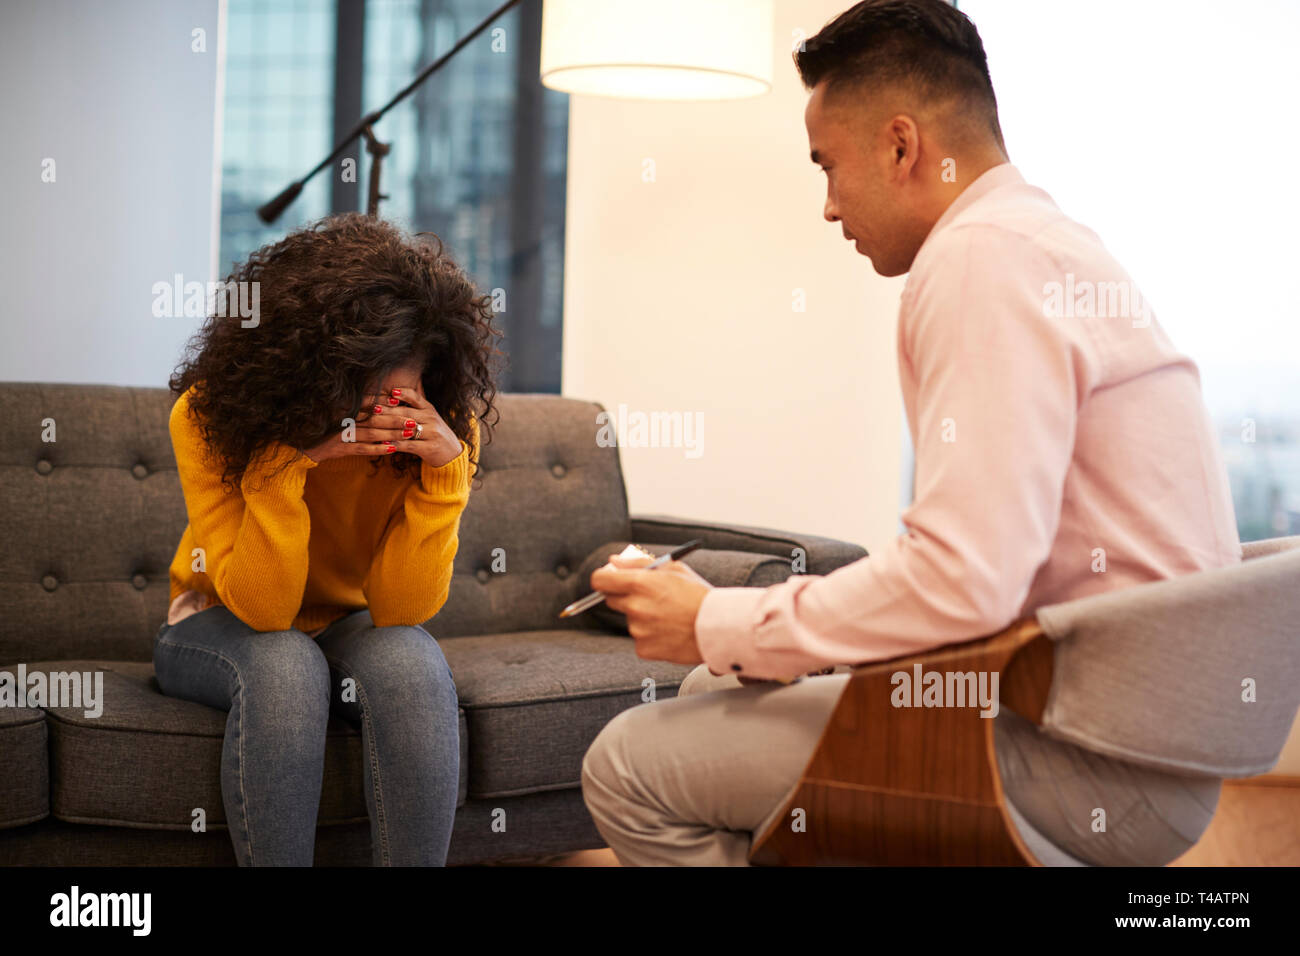 Unhappy Woman Sitting On Couch Meeting With Male Counsellor In Office Stock Photo